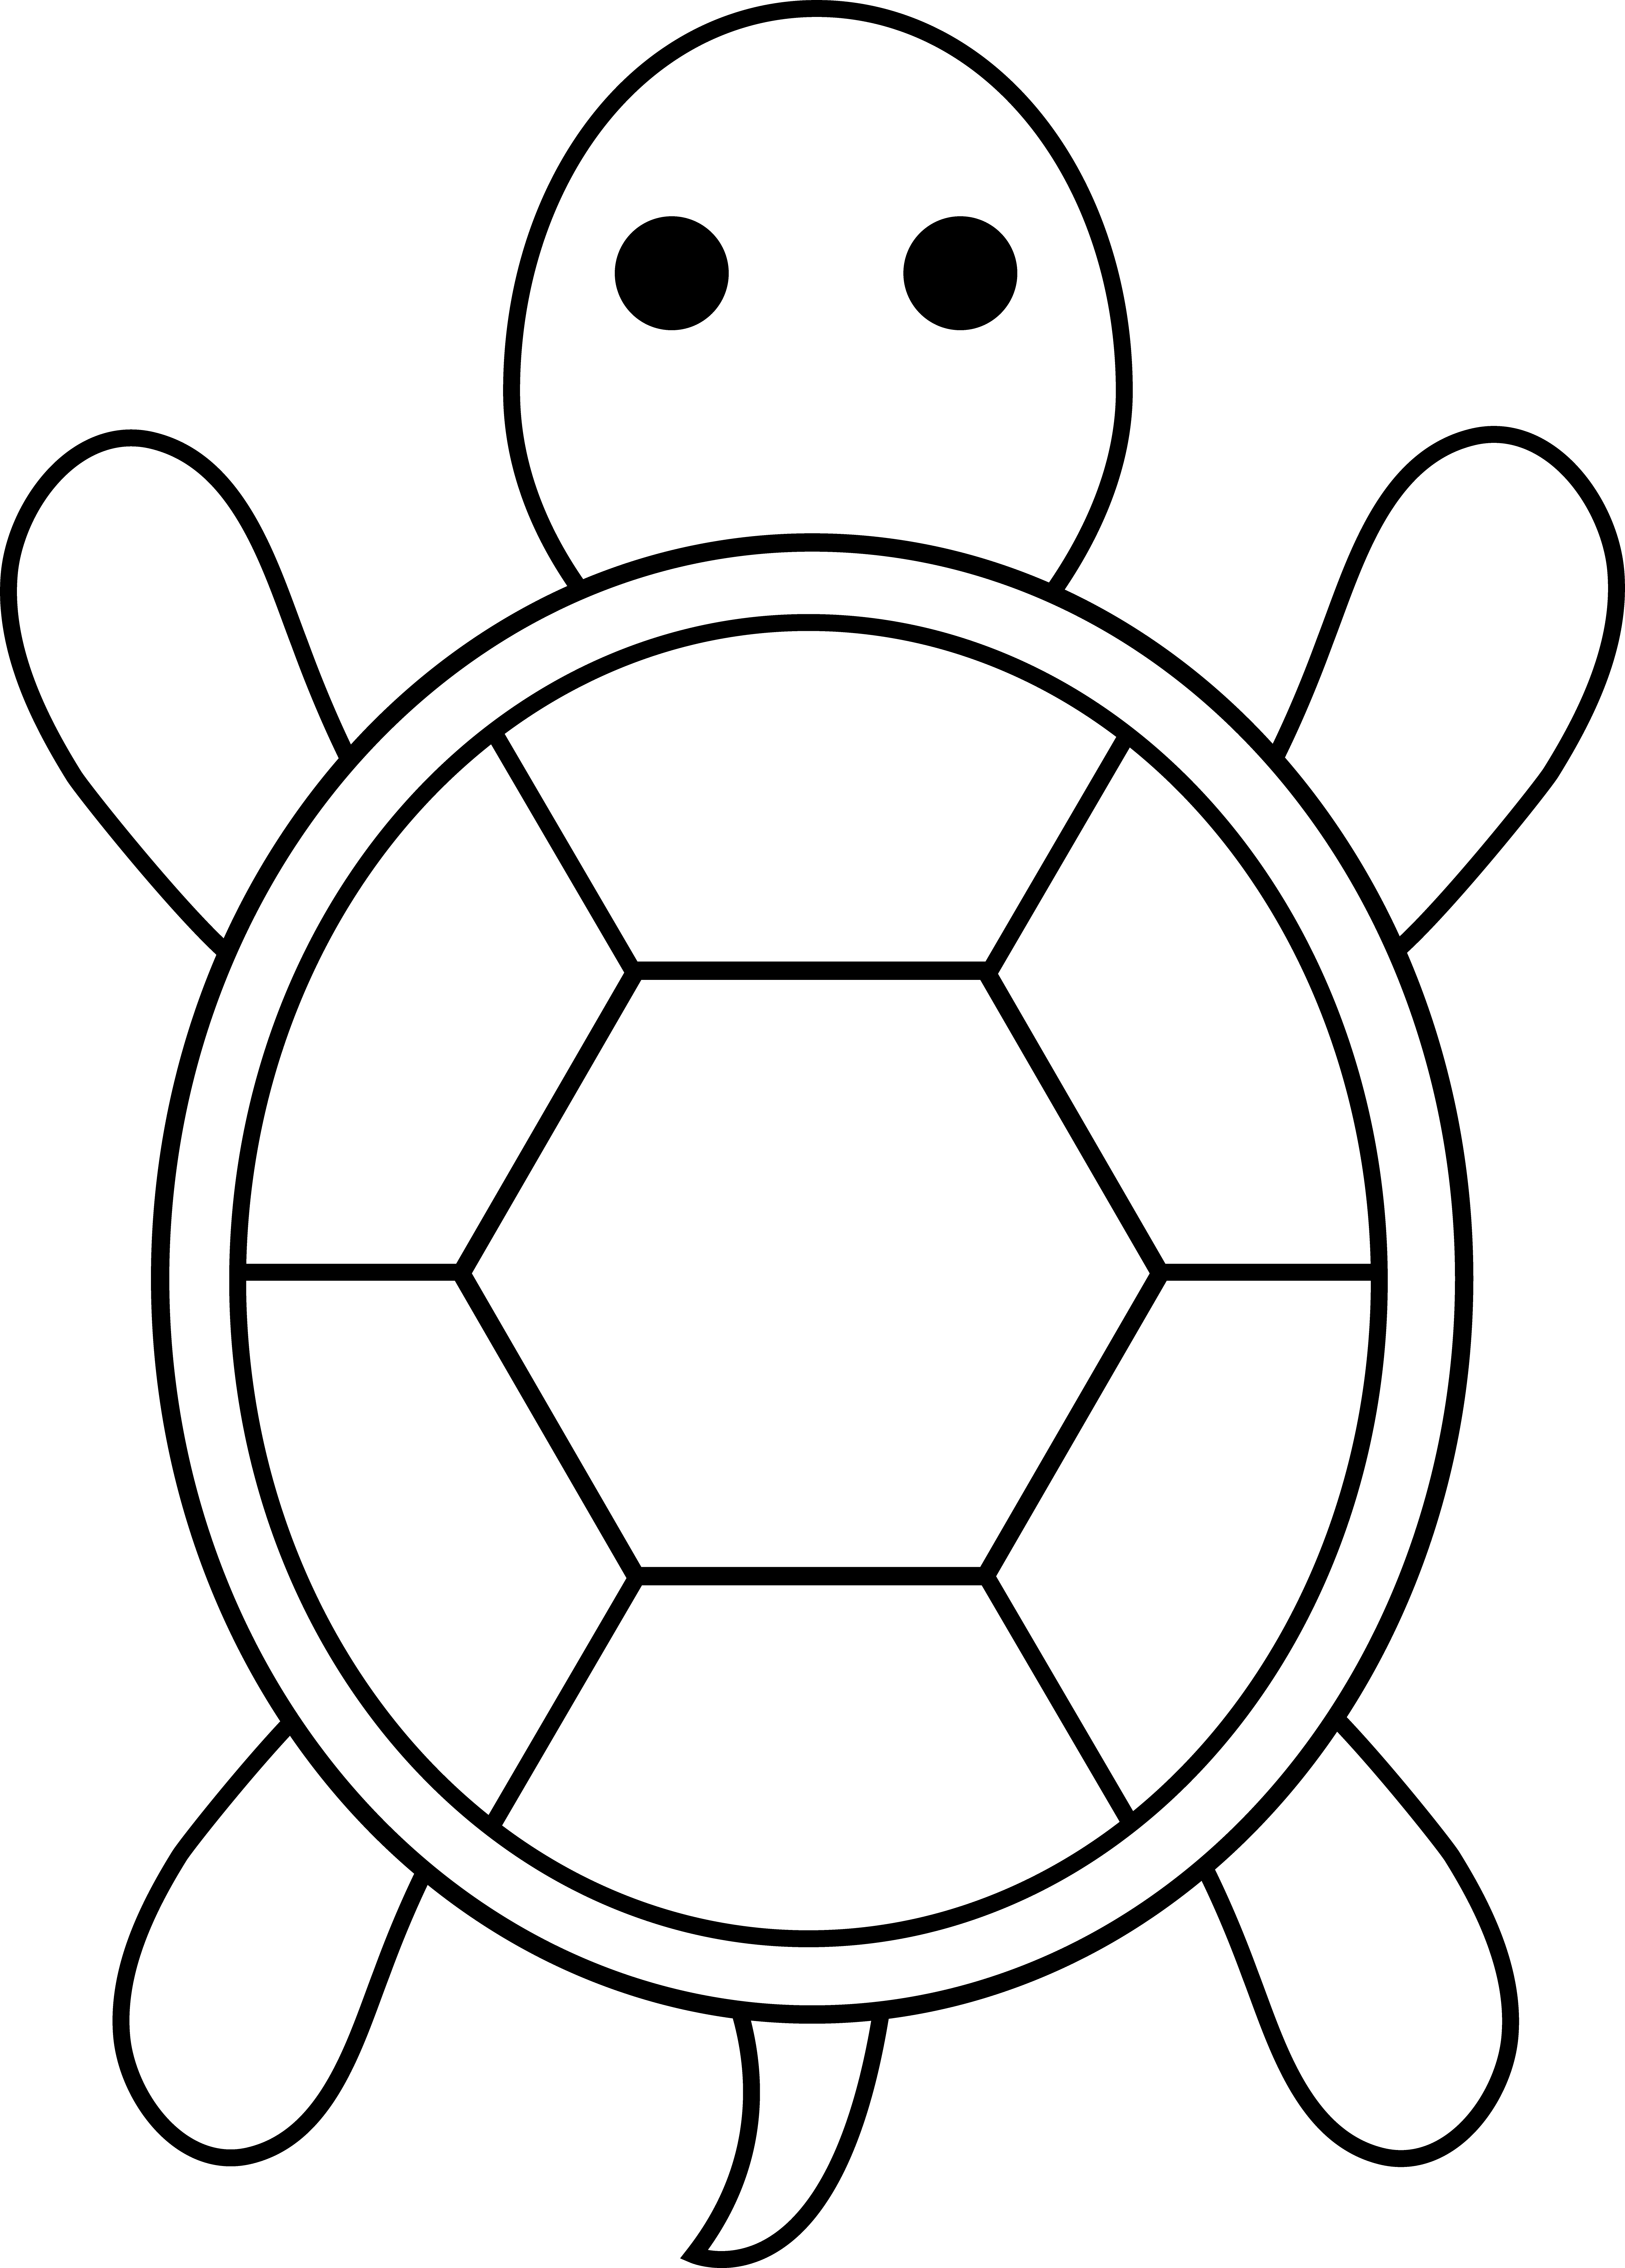 Free Turtle Images Free, Download Free Clip Art, Free Clip